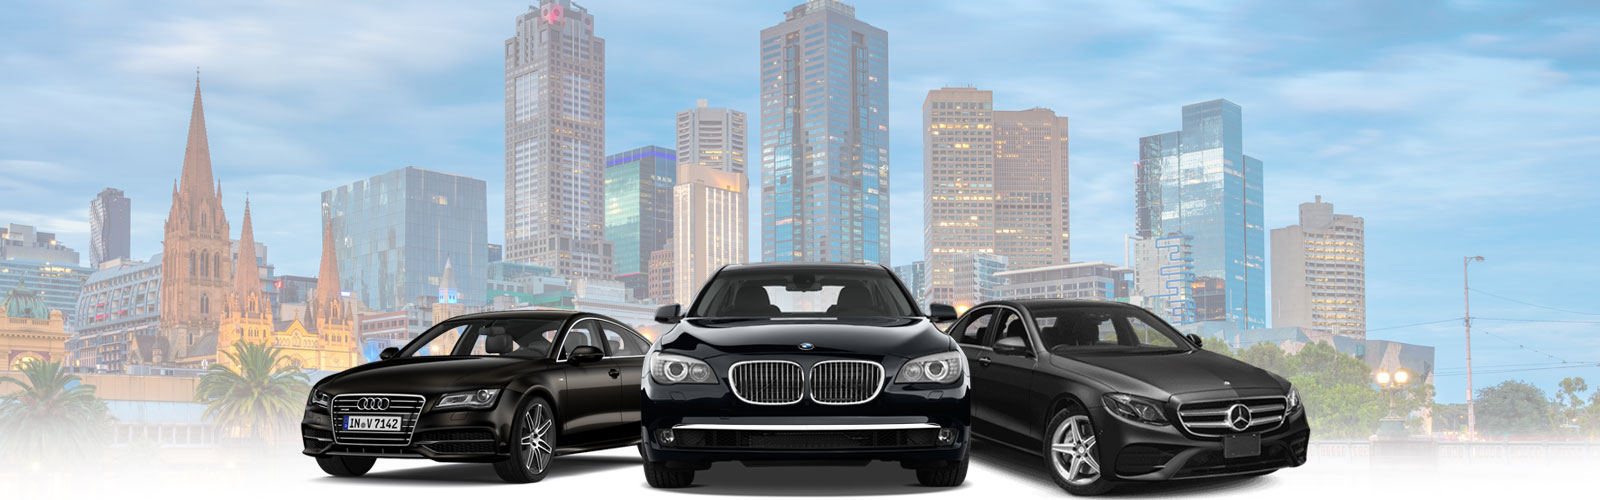 Best Limo Car Services in Melbourne